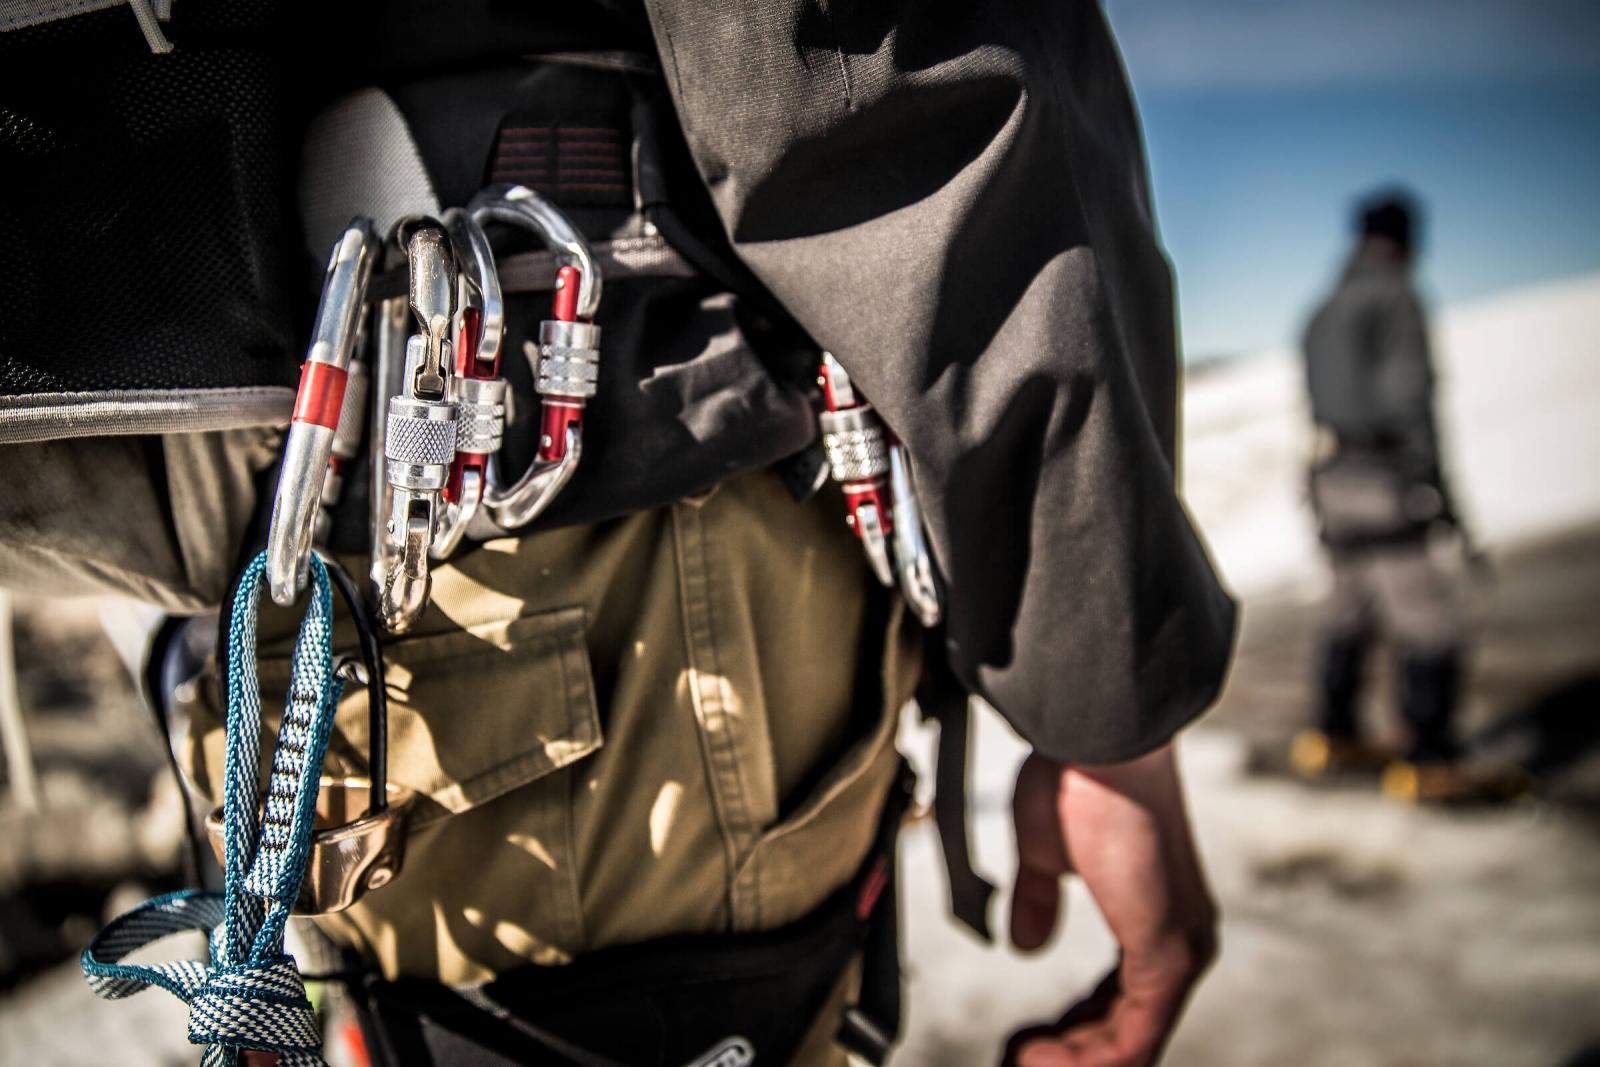 Hiking gear on a Greenland Travel guide in East Greenland. By Mads Pihl